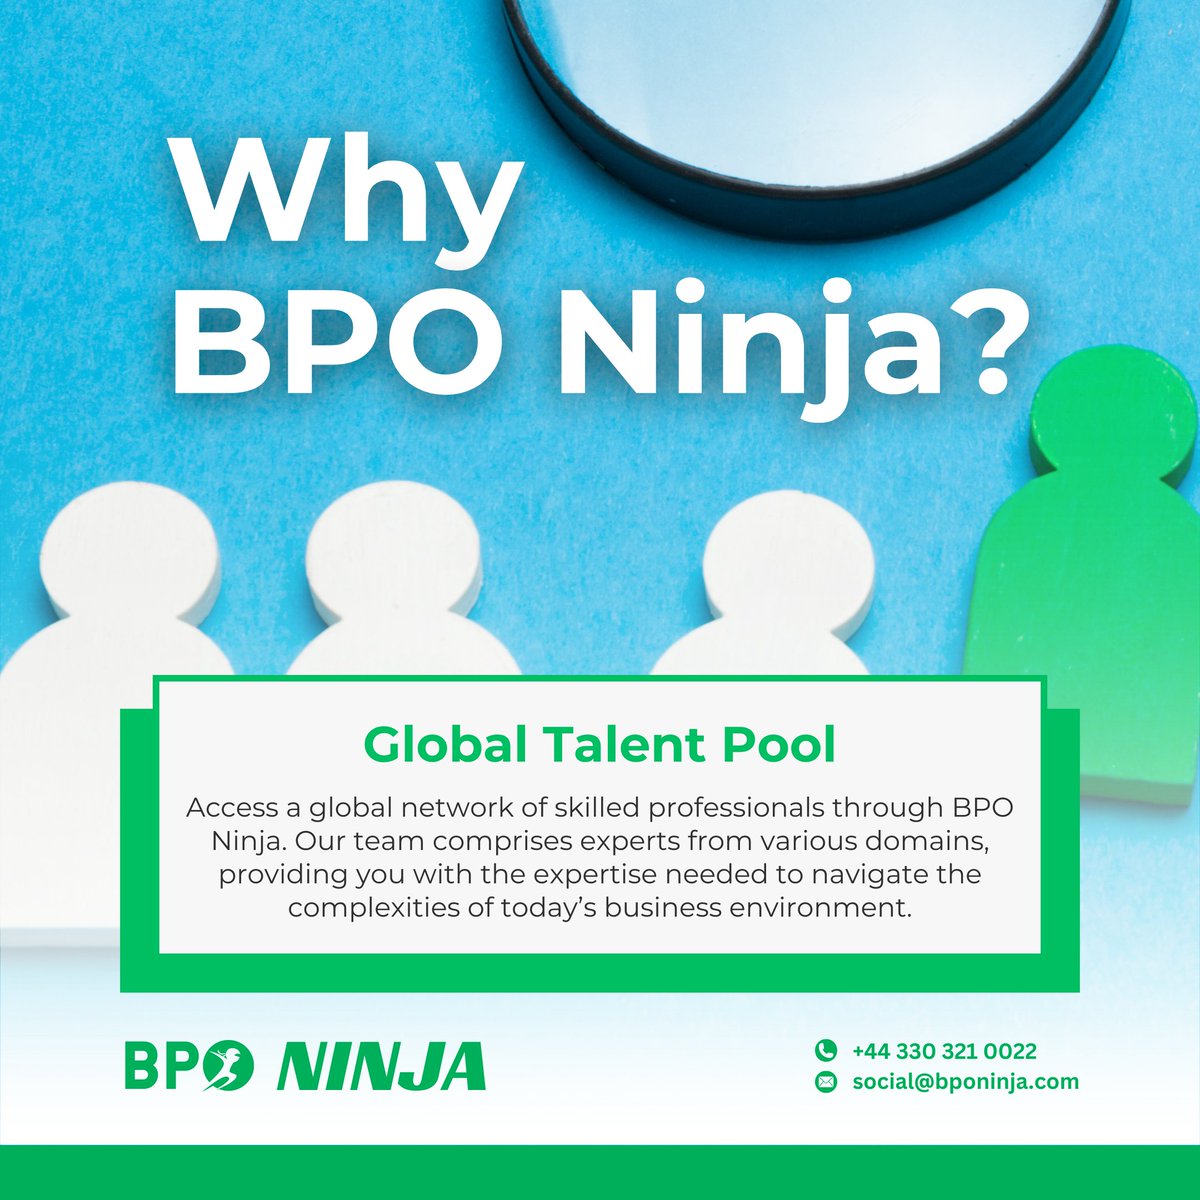 Dive into our Global Talent Pool! Access a diverse network of skilled professionals worldwide, ready to tackle the challenges of today's business landscape. 

Contact us: 
P: +44 330 321 0022 
E: social@bponija.com 
W: eu1.hubs.ly/H08DKvK0 

#BPO #CostCutting #UKCompanies